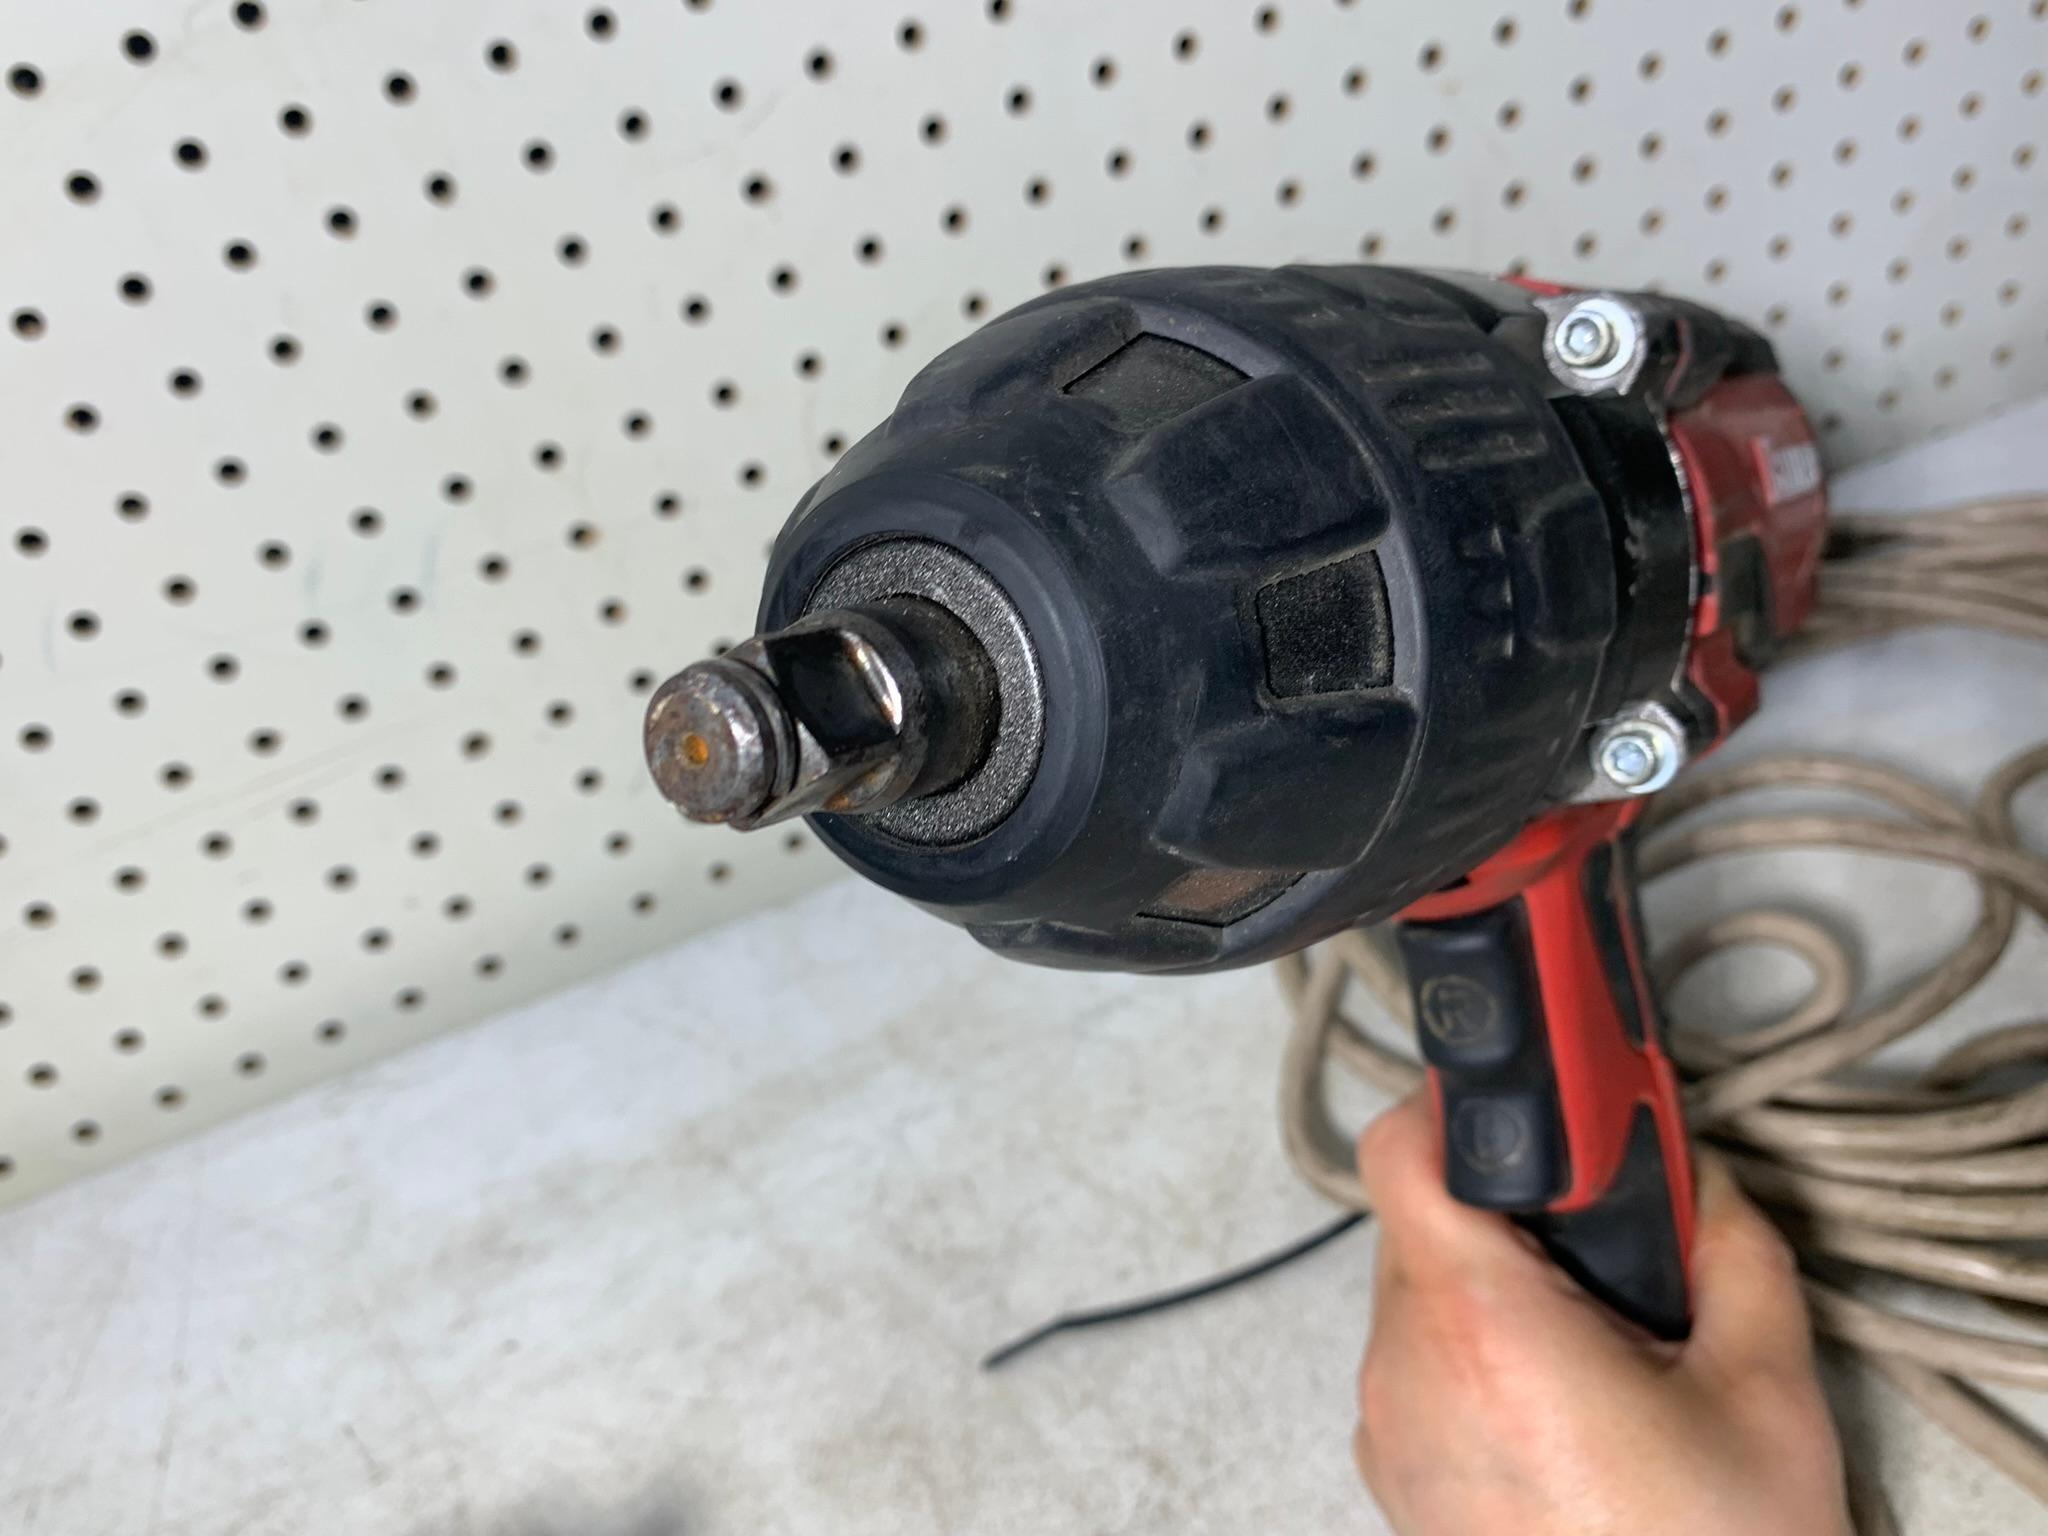 Jepson & Bauer Impact Wrench